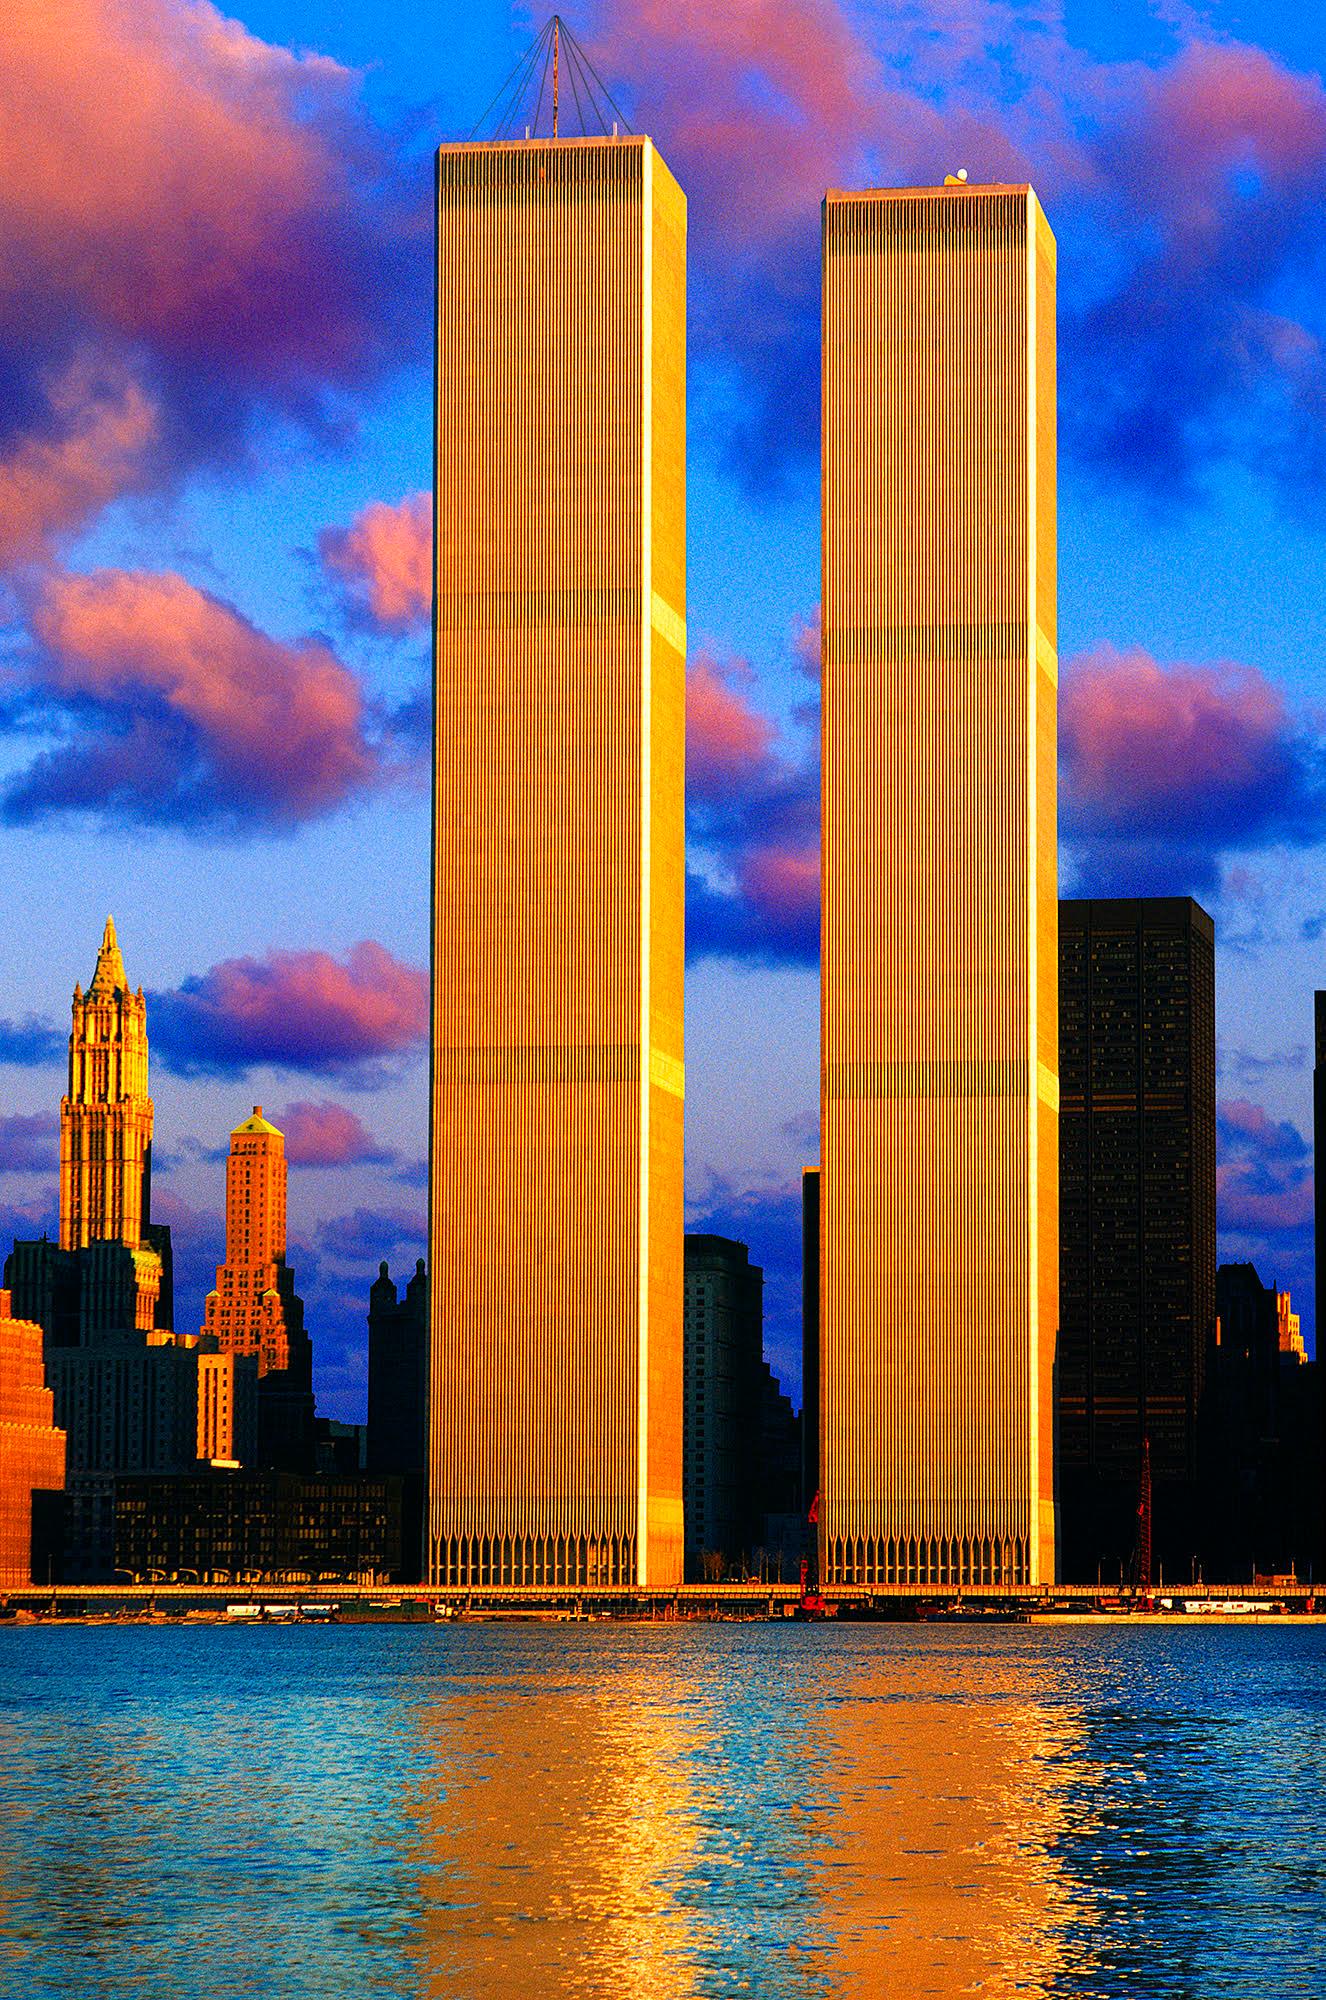 Mitchell Funk Abstract Photograph – 9/11 – Twin Towers in Angelic Light, Architektur 